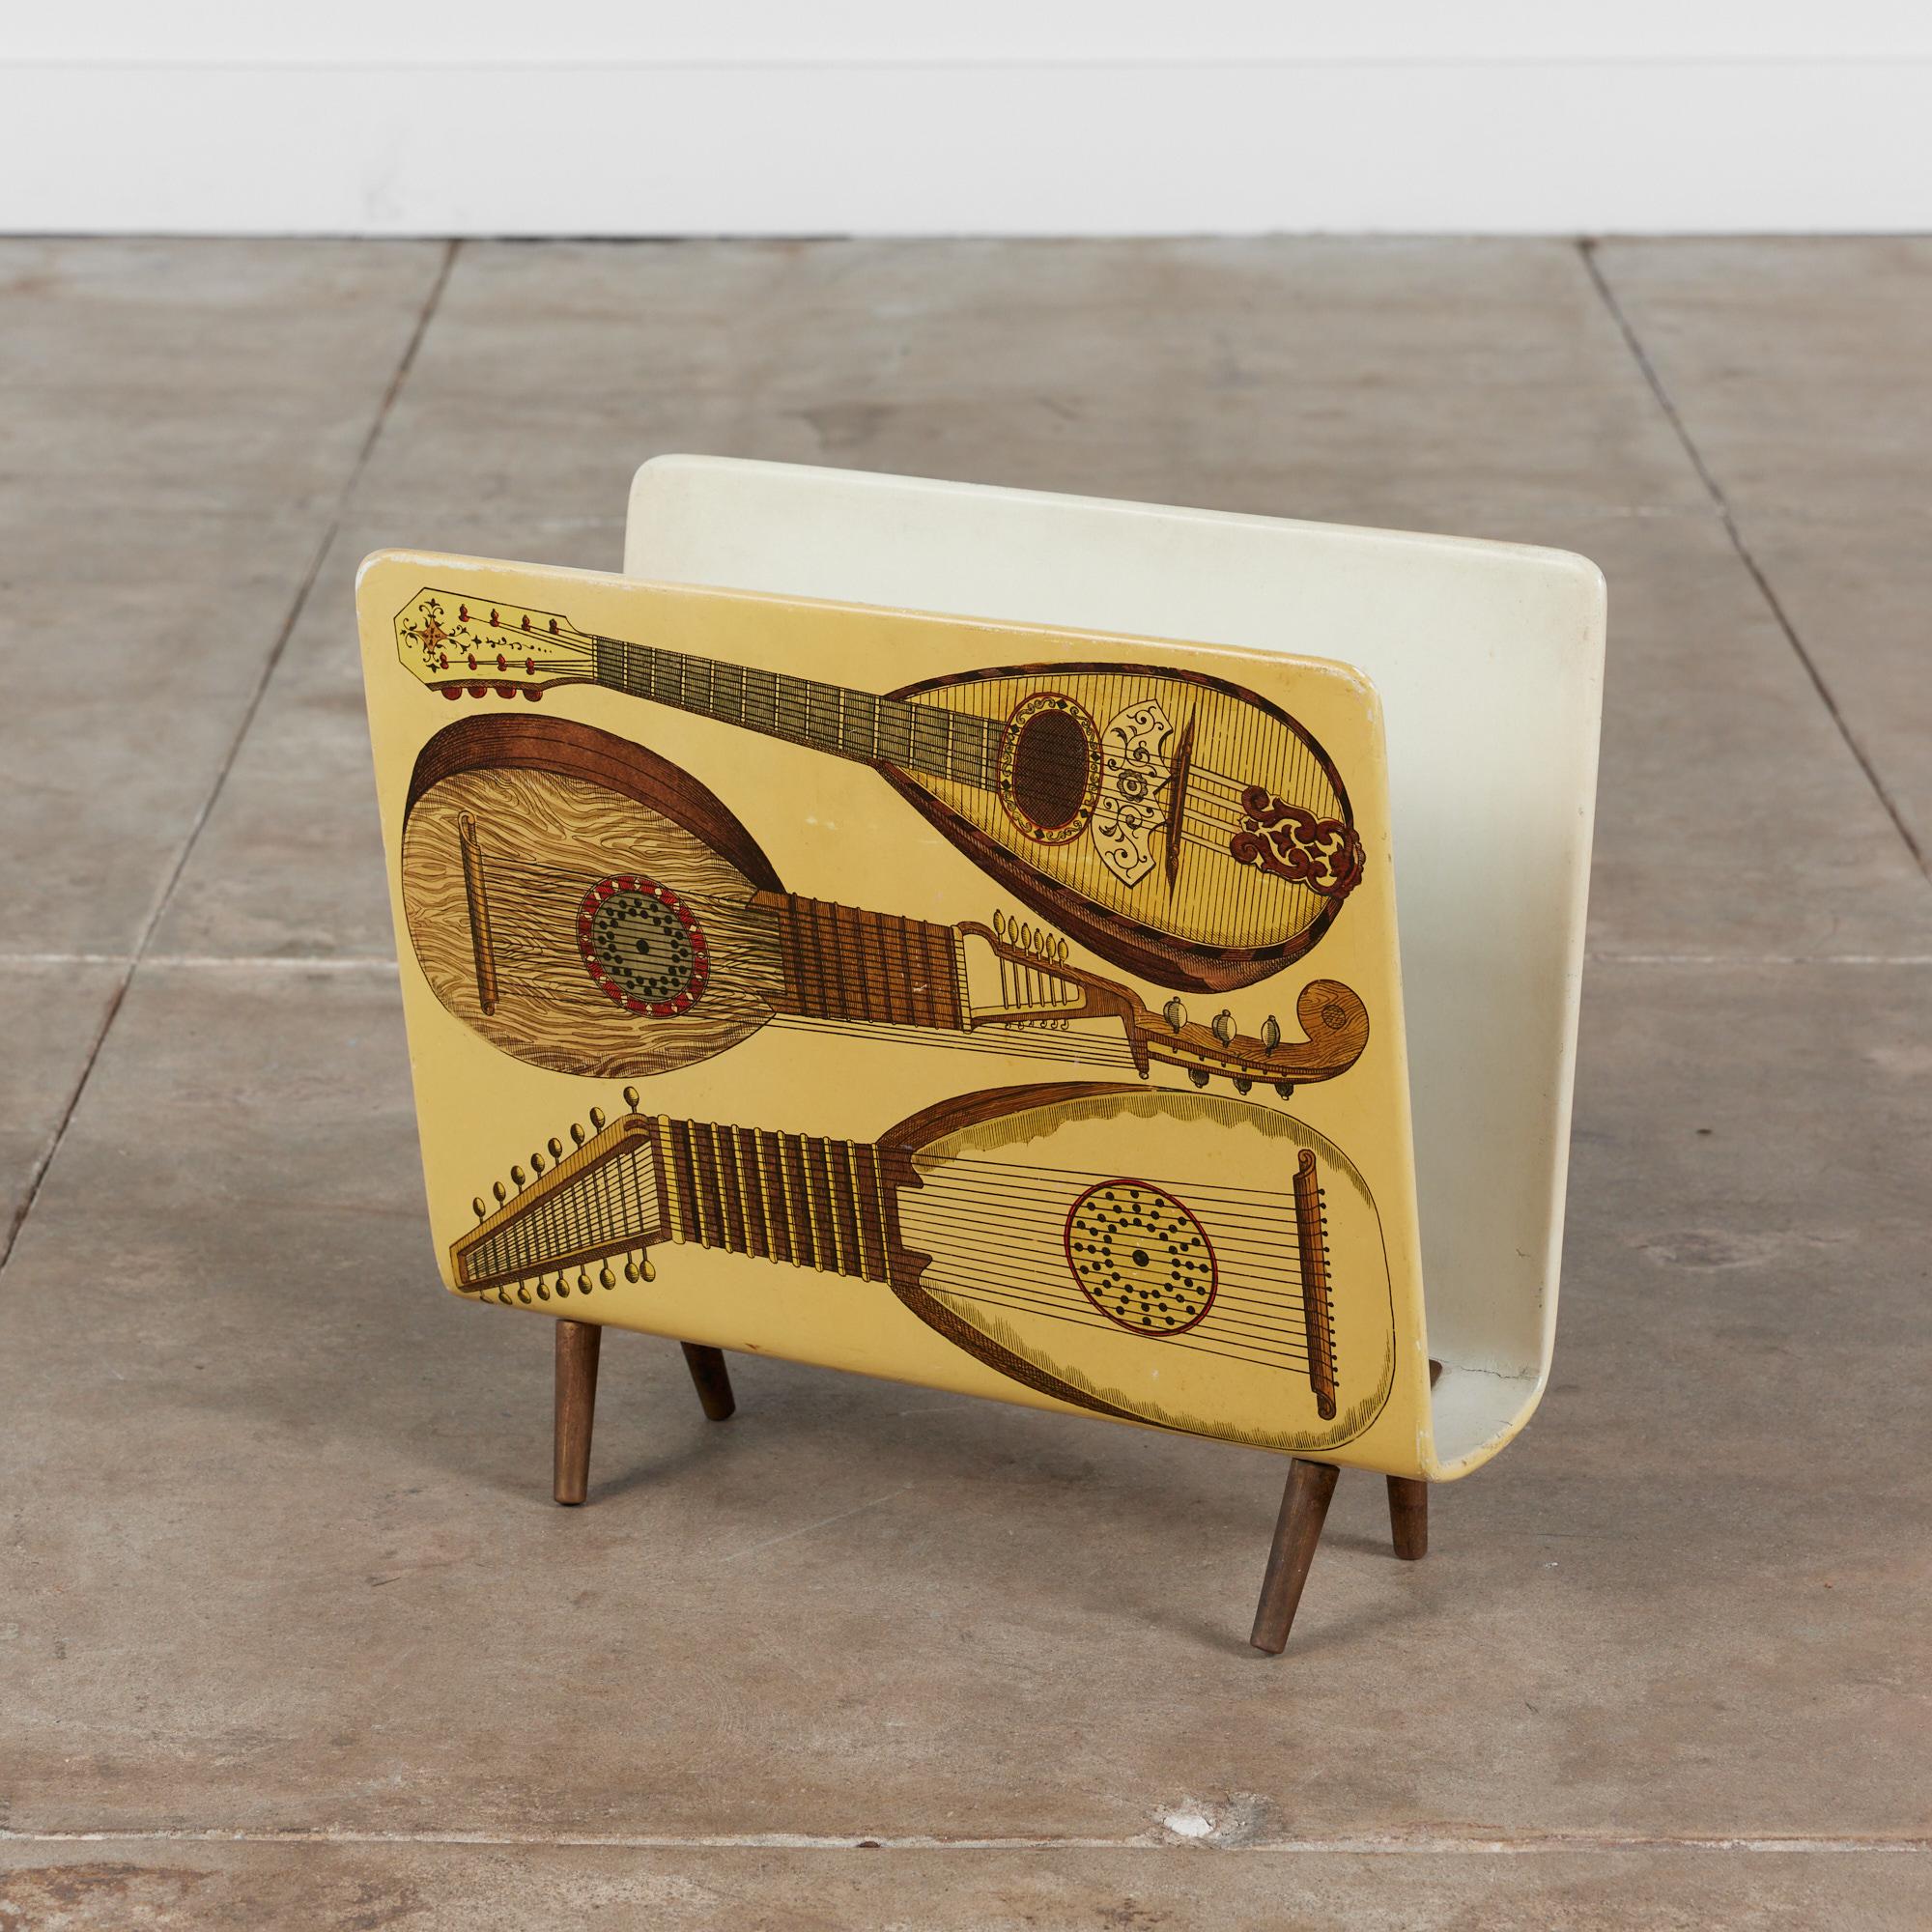 Magazine rack by Italian designer and artist, Piero Fornasetti, circa 1950s, Italy. The rack features a musical themed lithograph printed on plywood with a wire brass divider on the interior with four splayed brass feet.

Dimensions
16.75